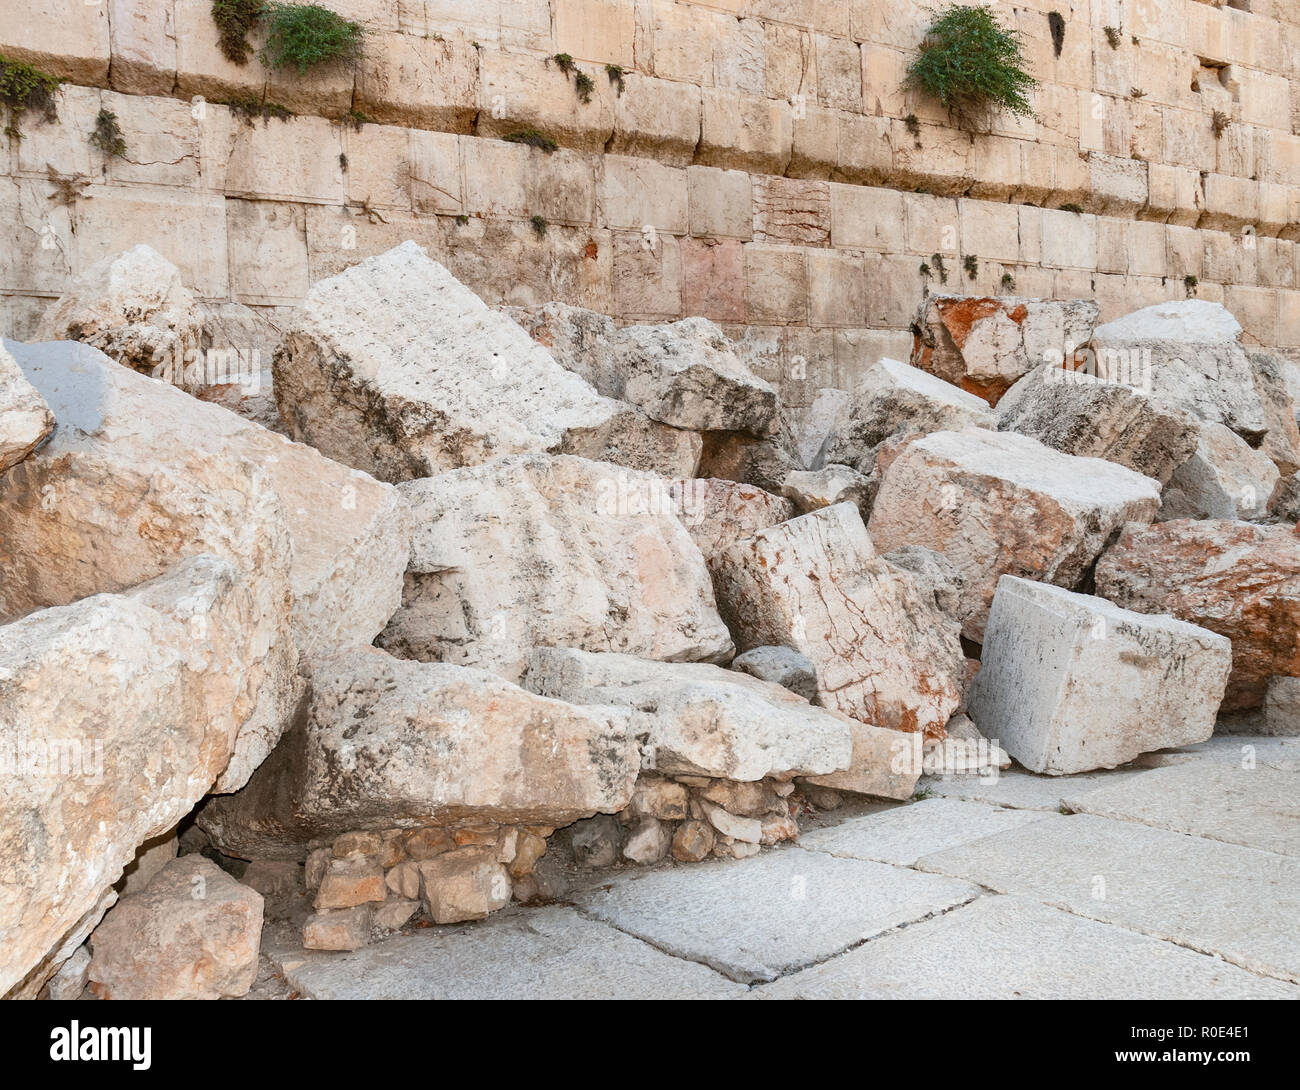 closeup of stones thrown from the second temple to the street below after the destruction of the temple in 70 CE Stock Photo